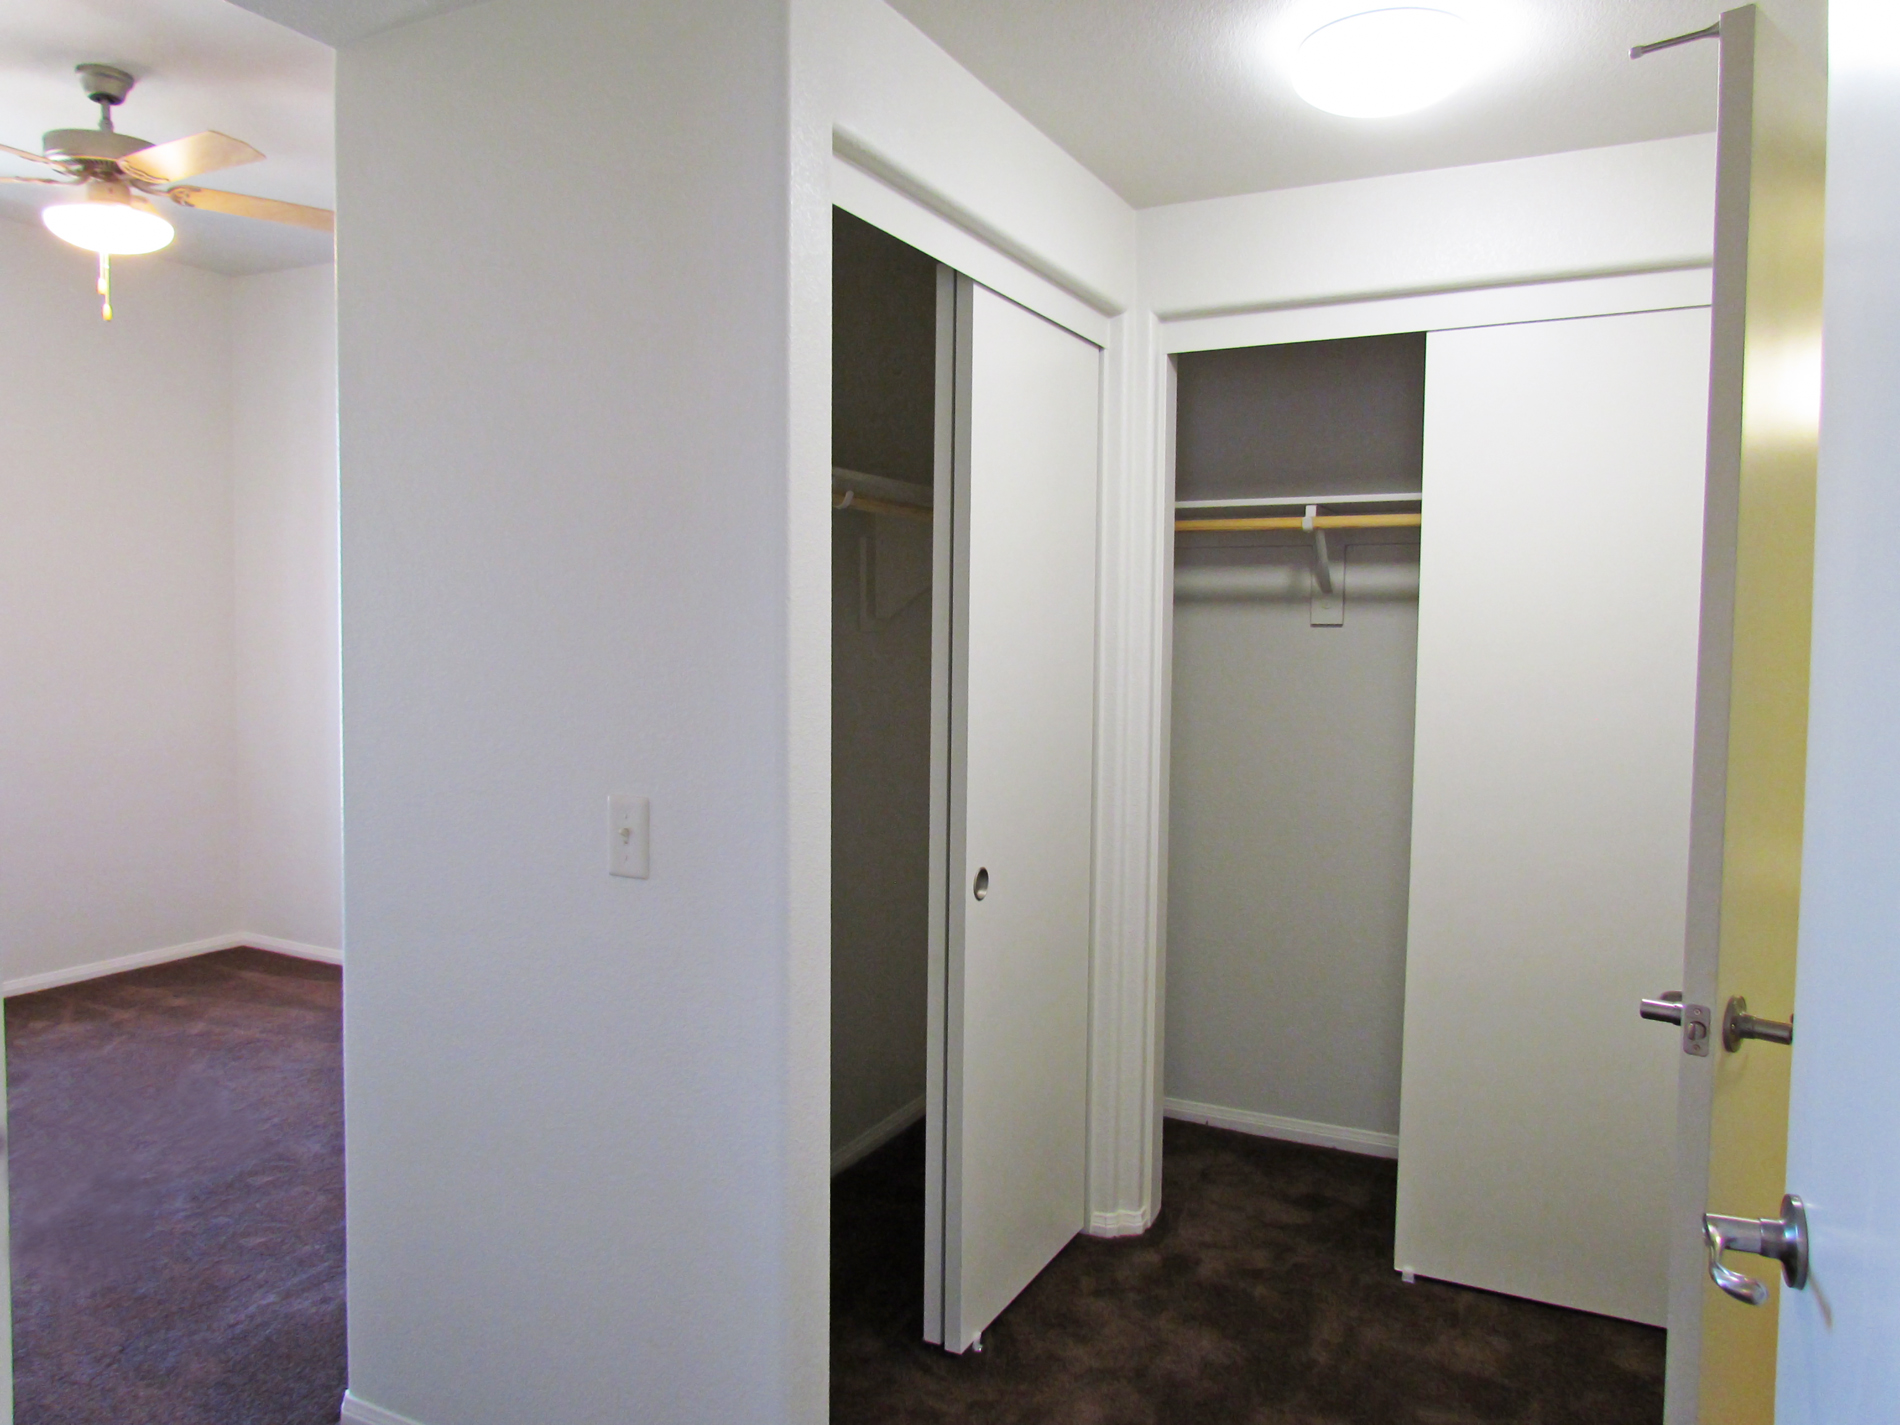 View of a Closet in a unit at Osborne Street Apartments.